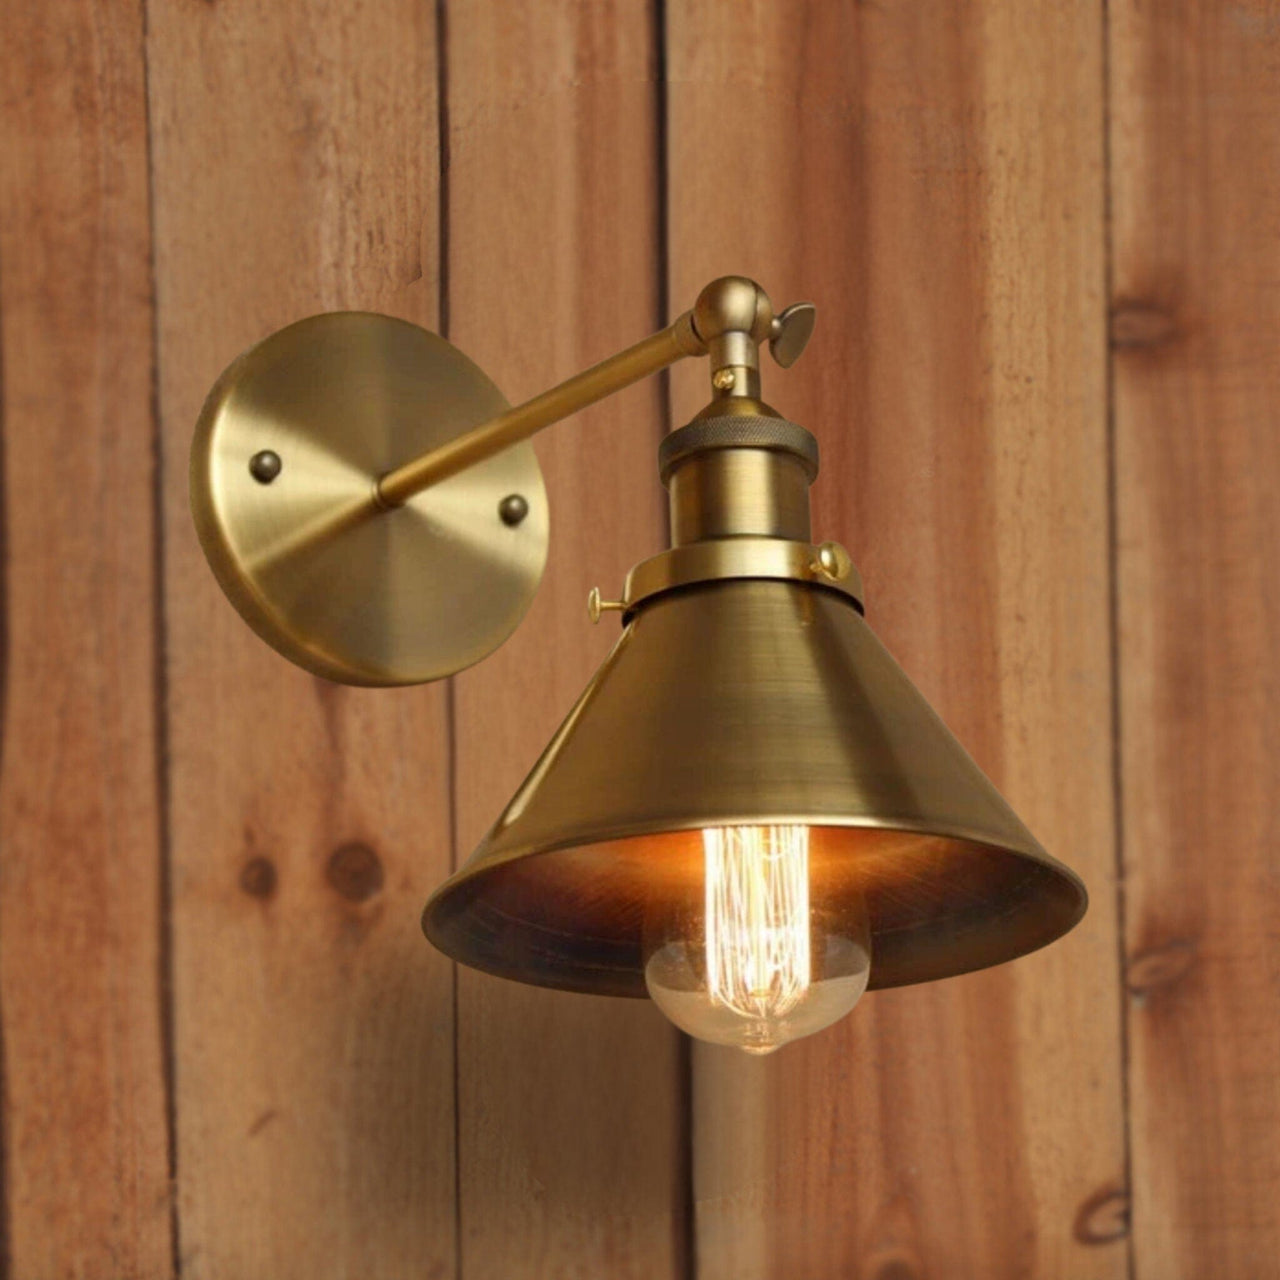 Retro Wall Lamp "BRASS VINTAGE BEUTY" Industrial Style Wall Fixture Sconces Artedimo 